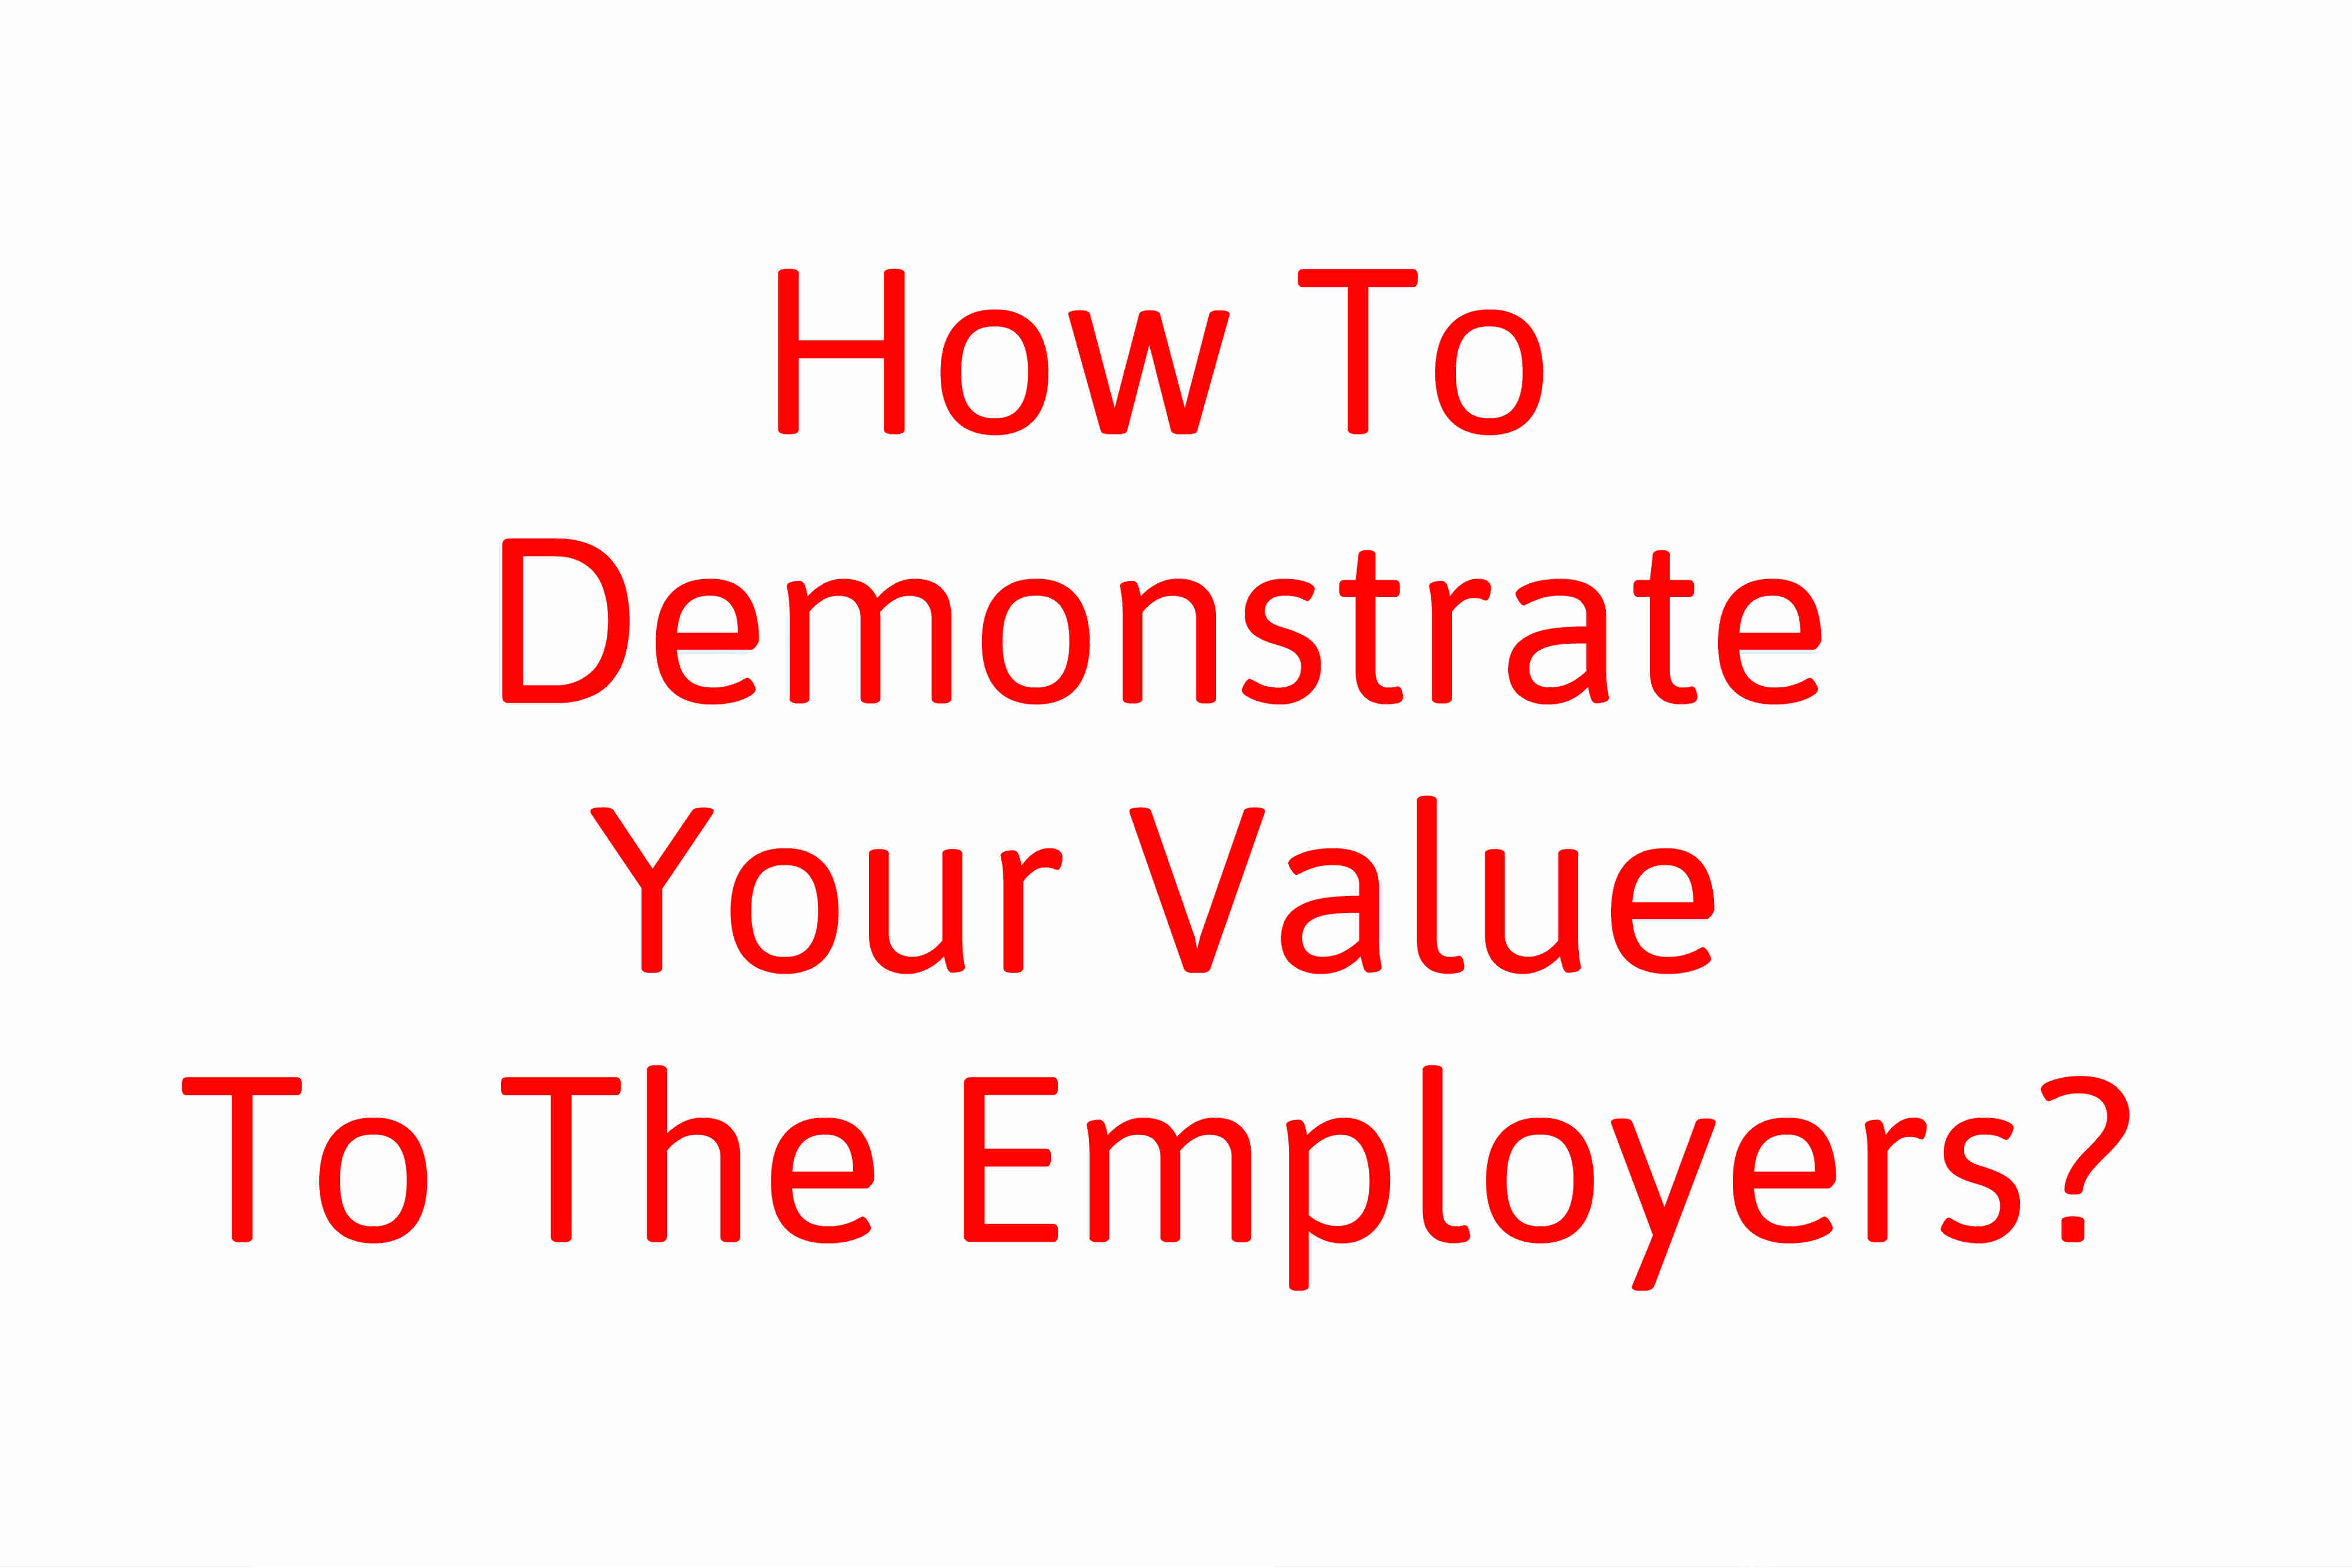 How To Demonstrate Your Value To The Employers